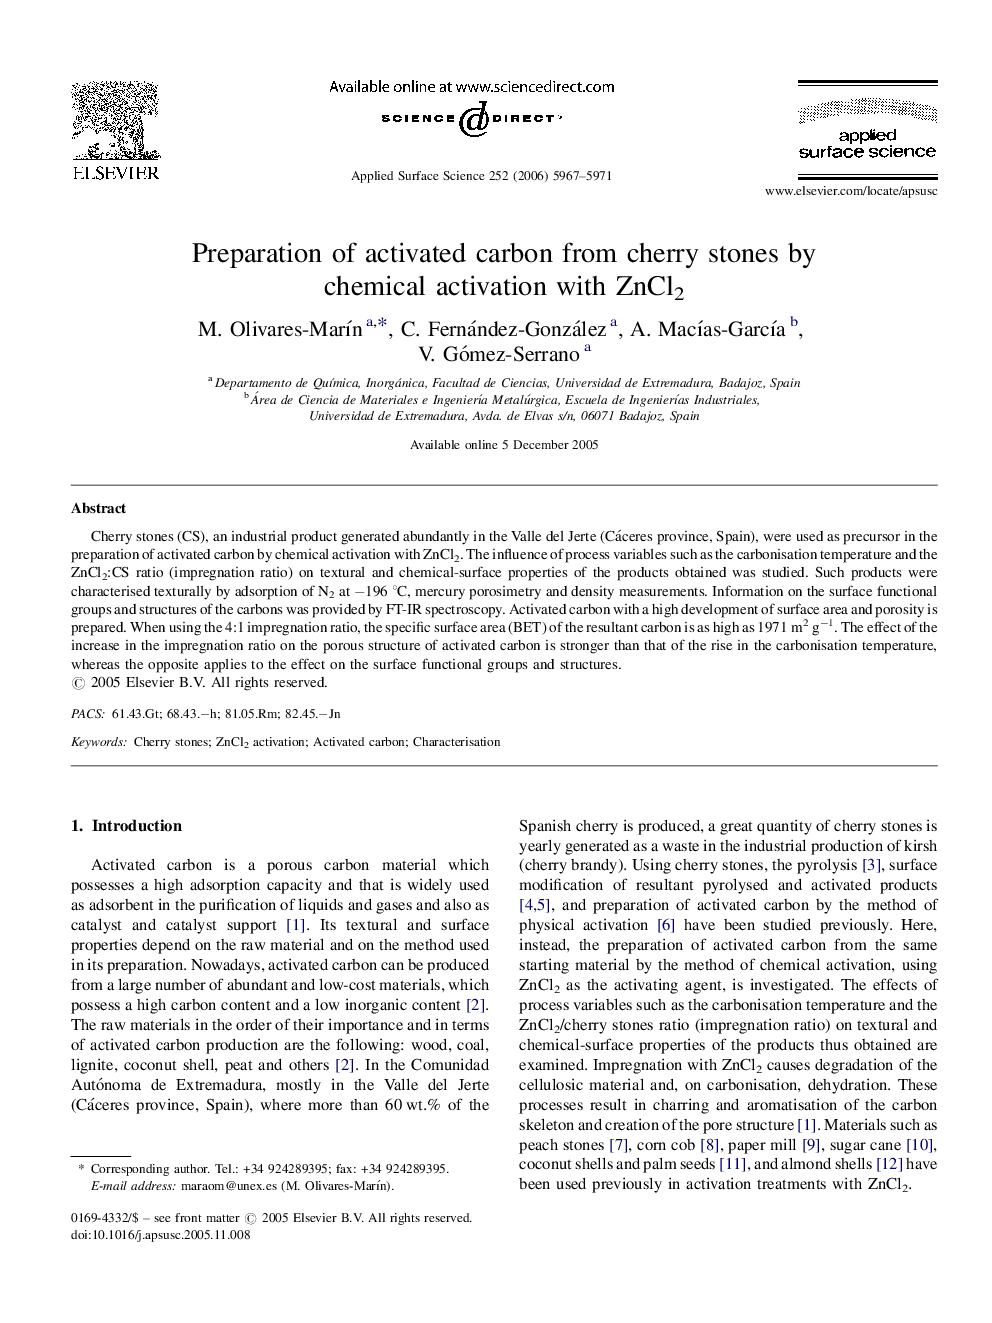 Preparation of activated carbon from cherry stones by chemical activation with ZnCl2